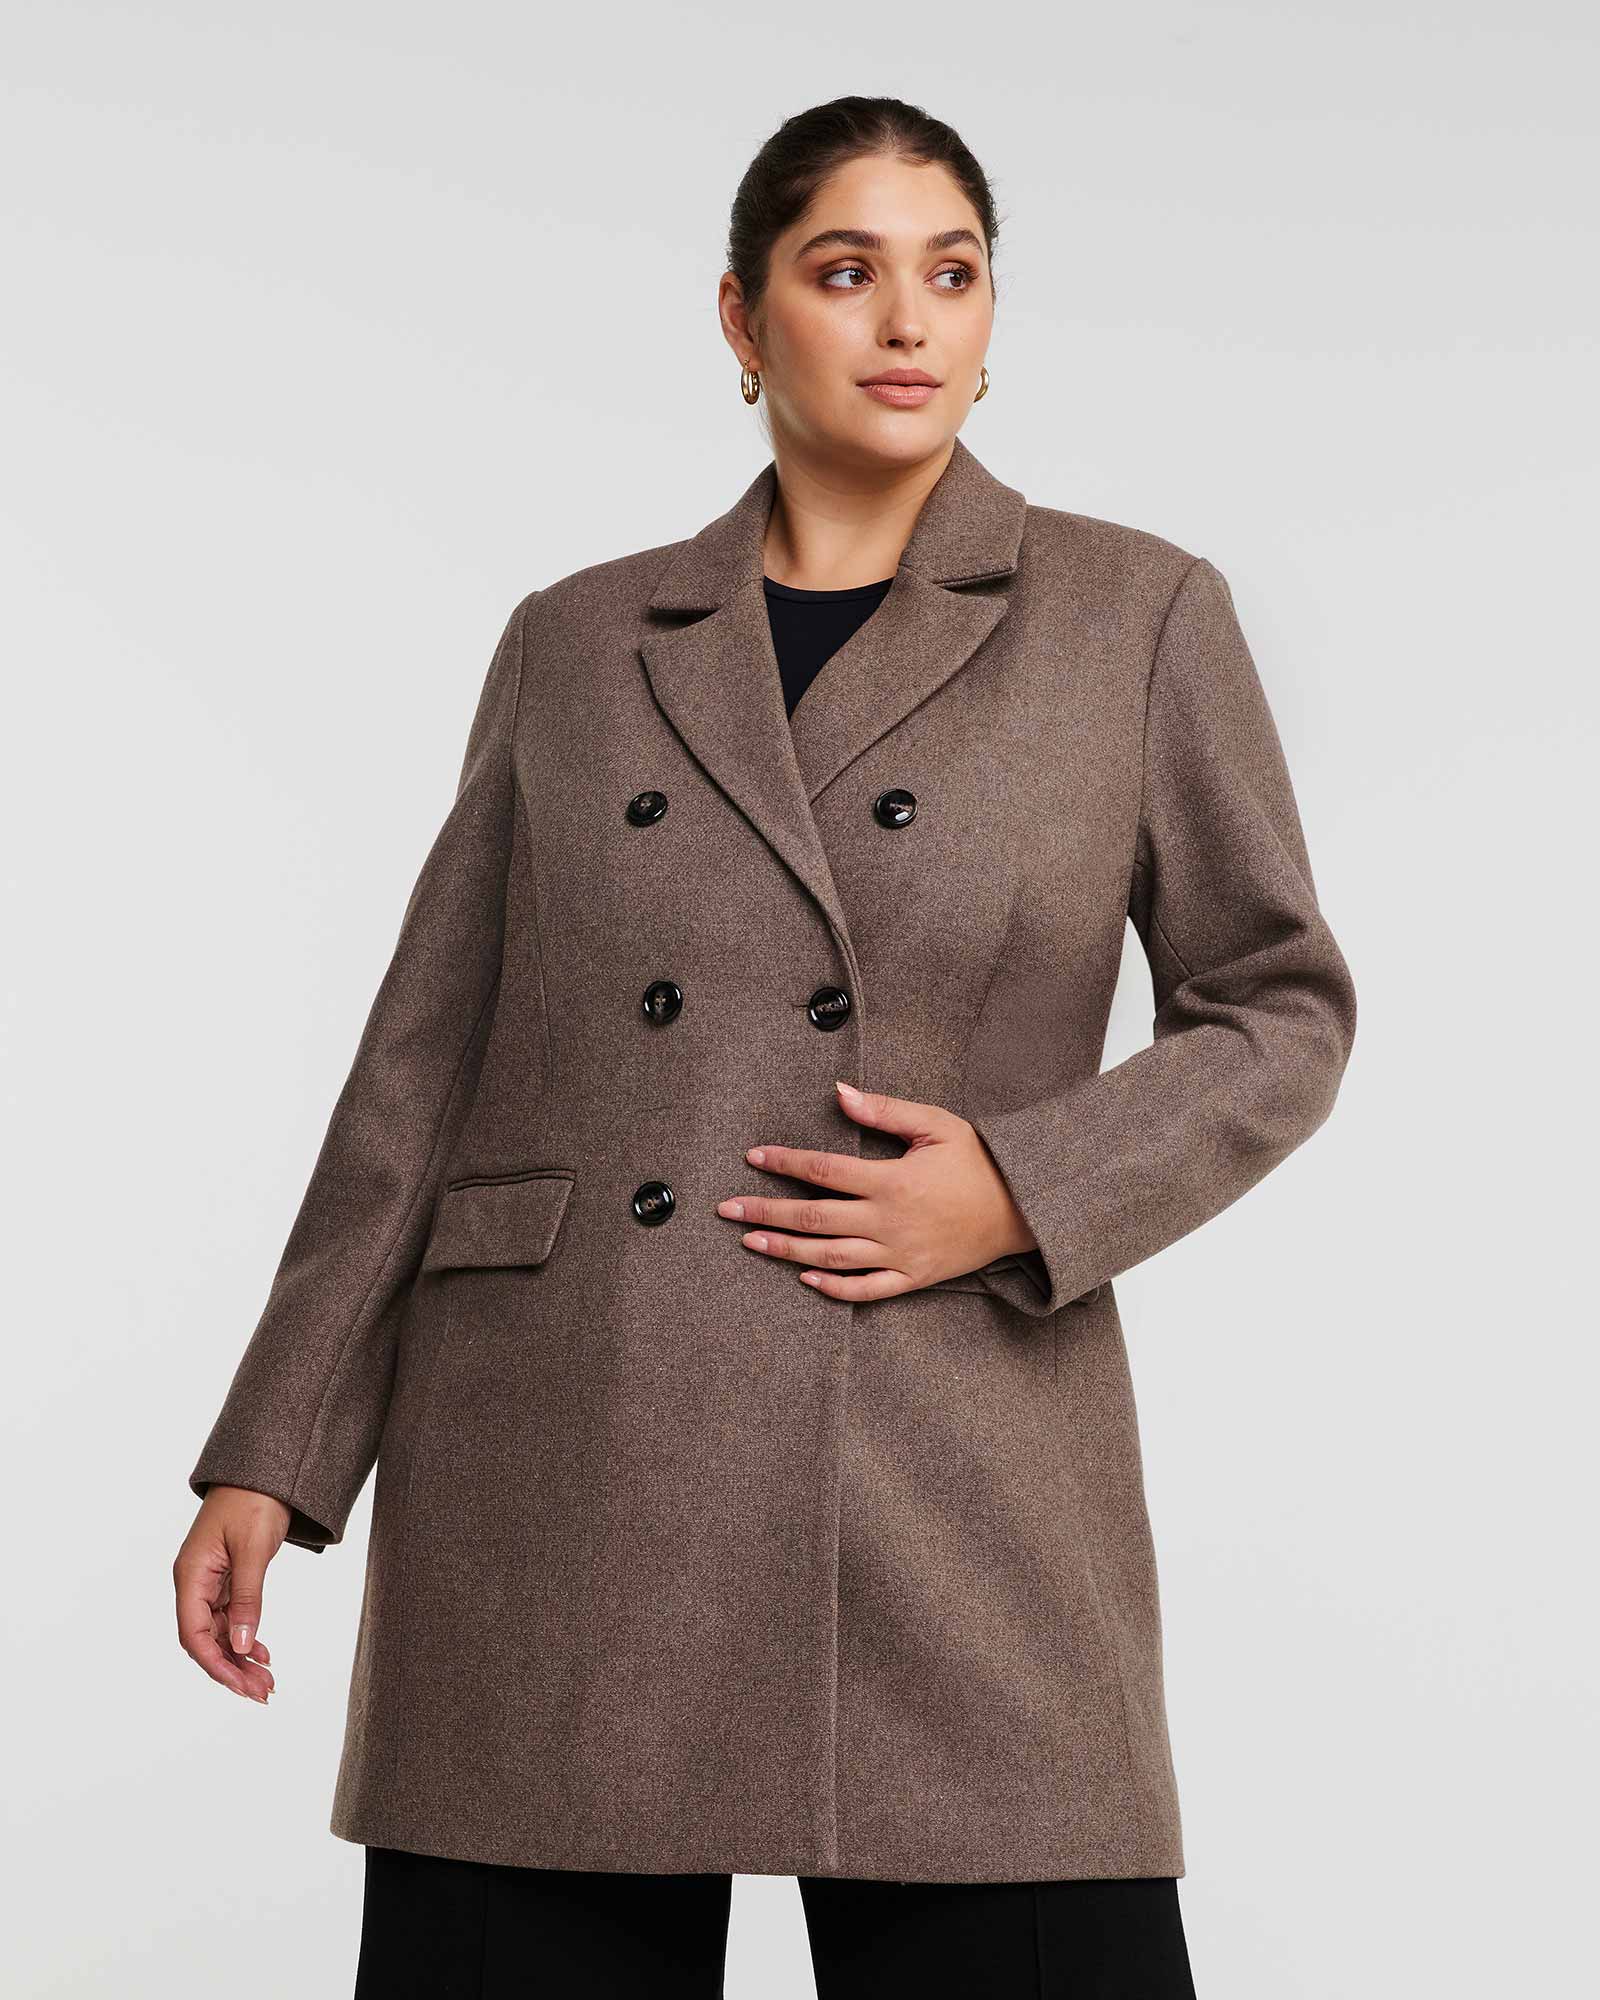 A plus-size woman wearing a Redford Mocha Brown Double-Breasted Coat.